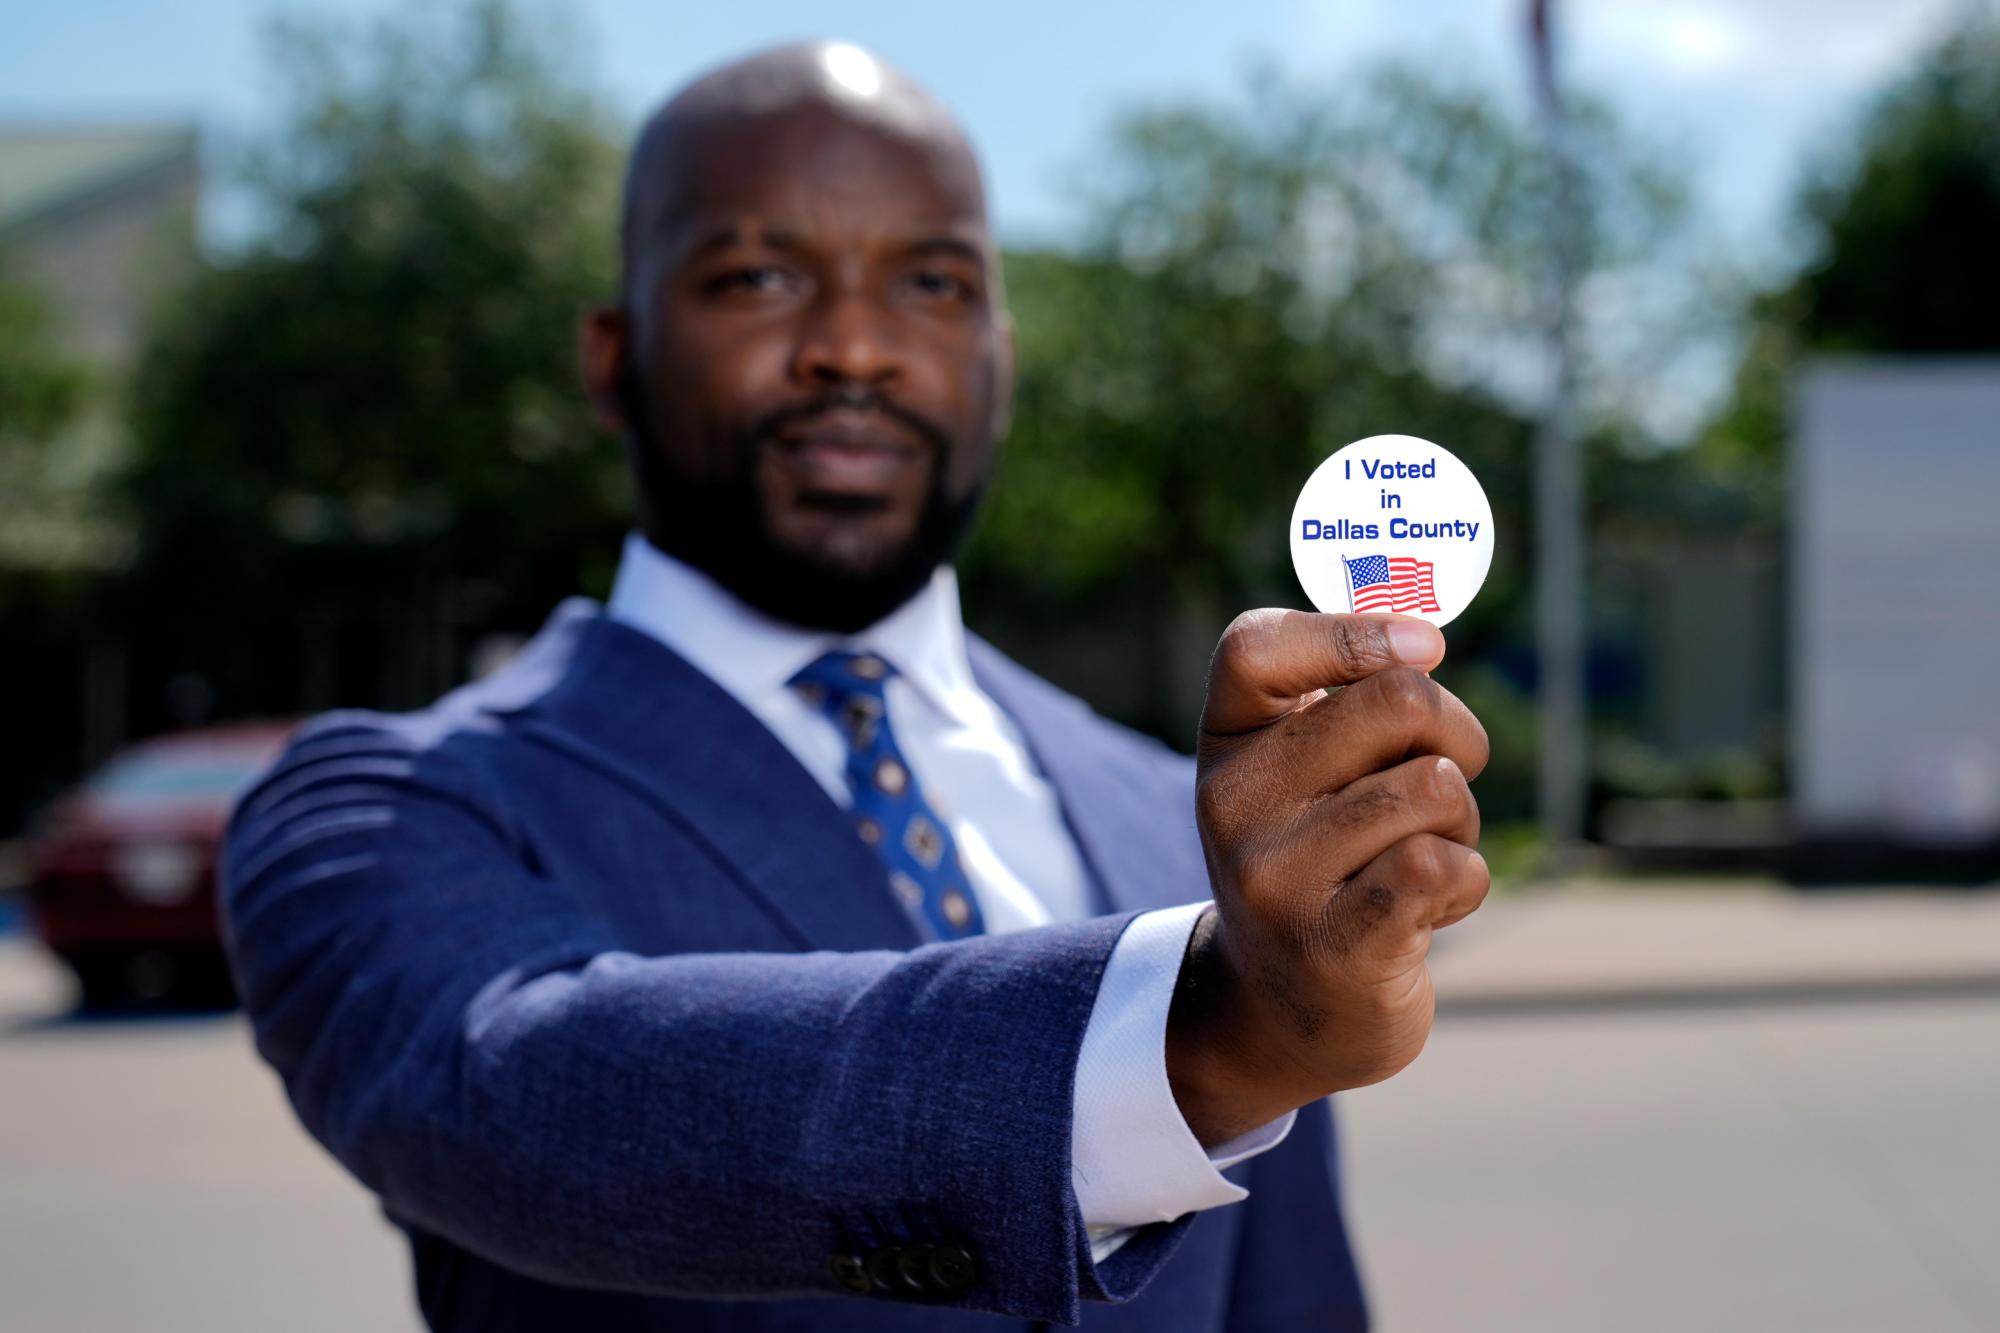 Abdul Dosunmu, the founder of the Young Black Lawyers Organizing Coalition, poses for a photo outside a voting location in Dallas, Monday, April 29, 2024. (AP Photo/Tony Gutierrez)